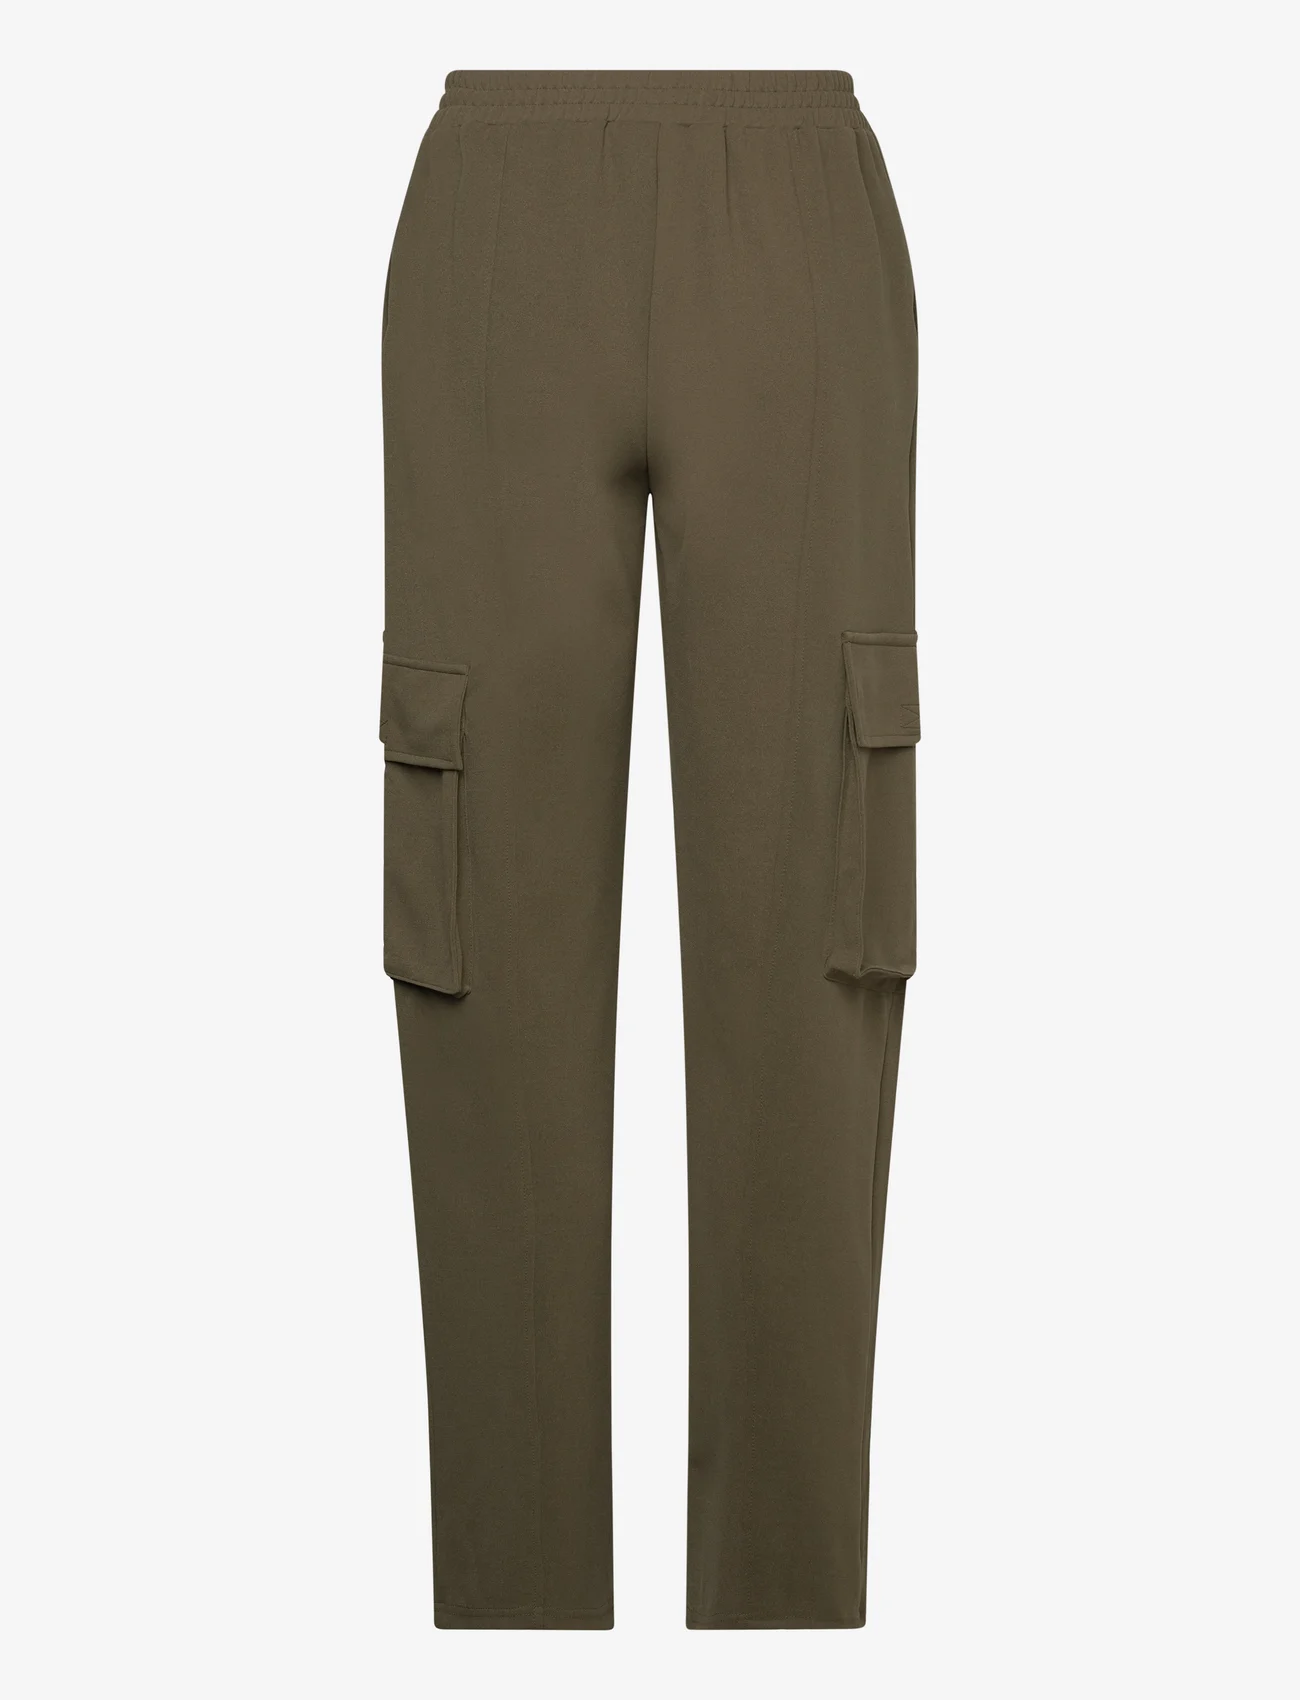 FREE/QUENT - FQMIVAN-PANT - cargo pants - olive night - 1